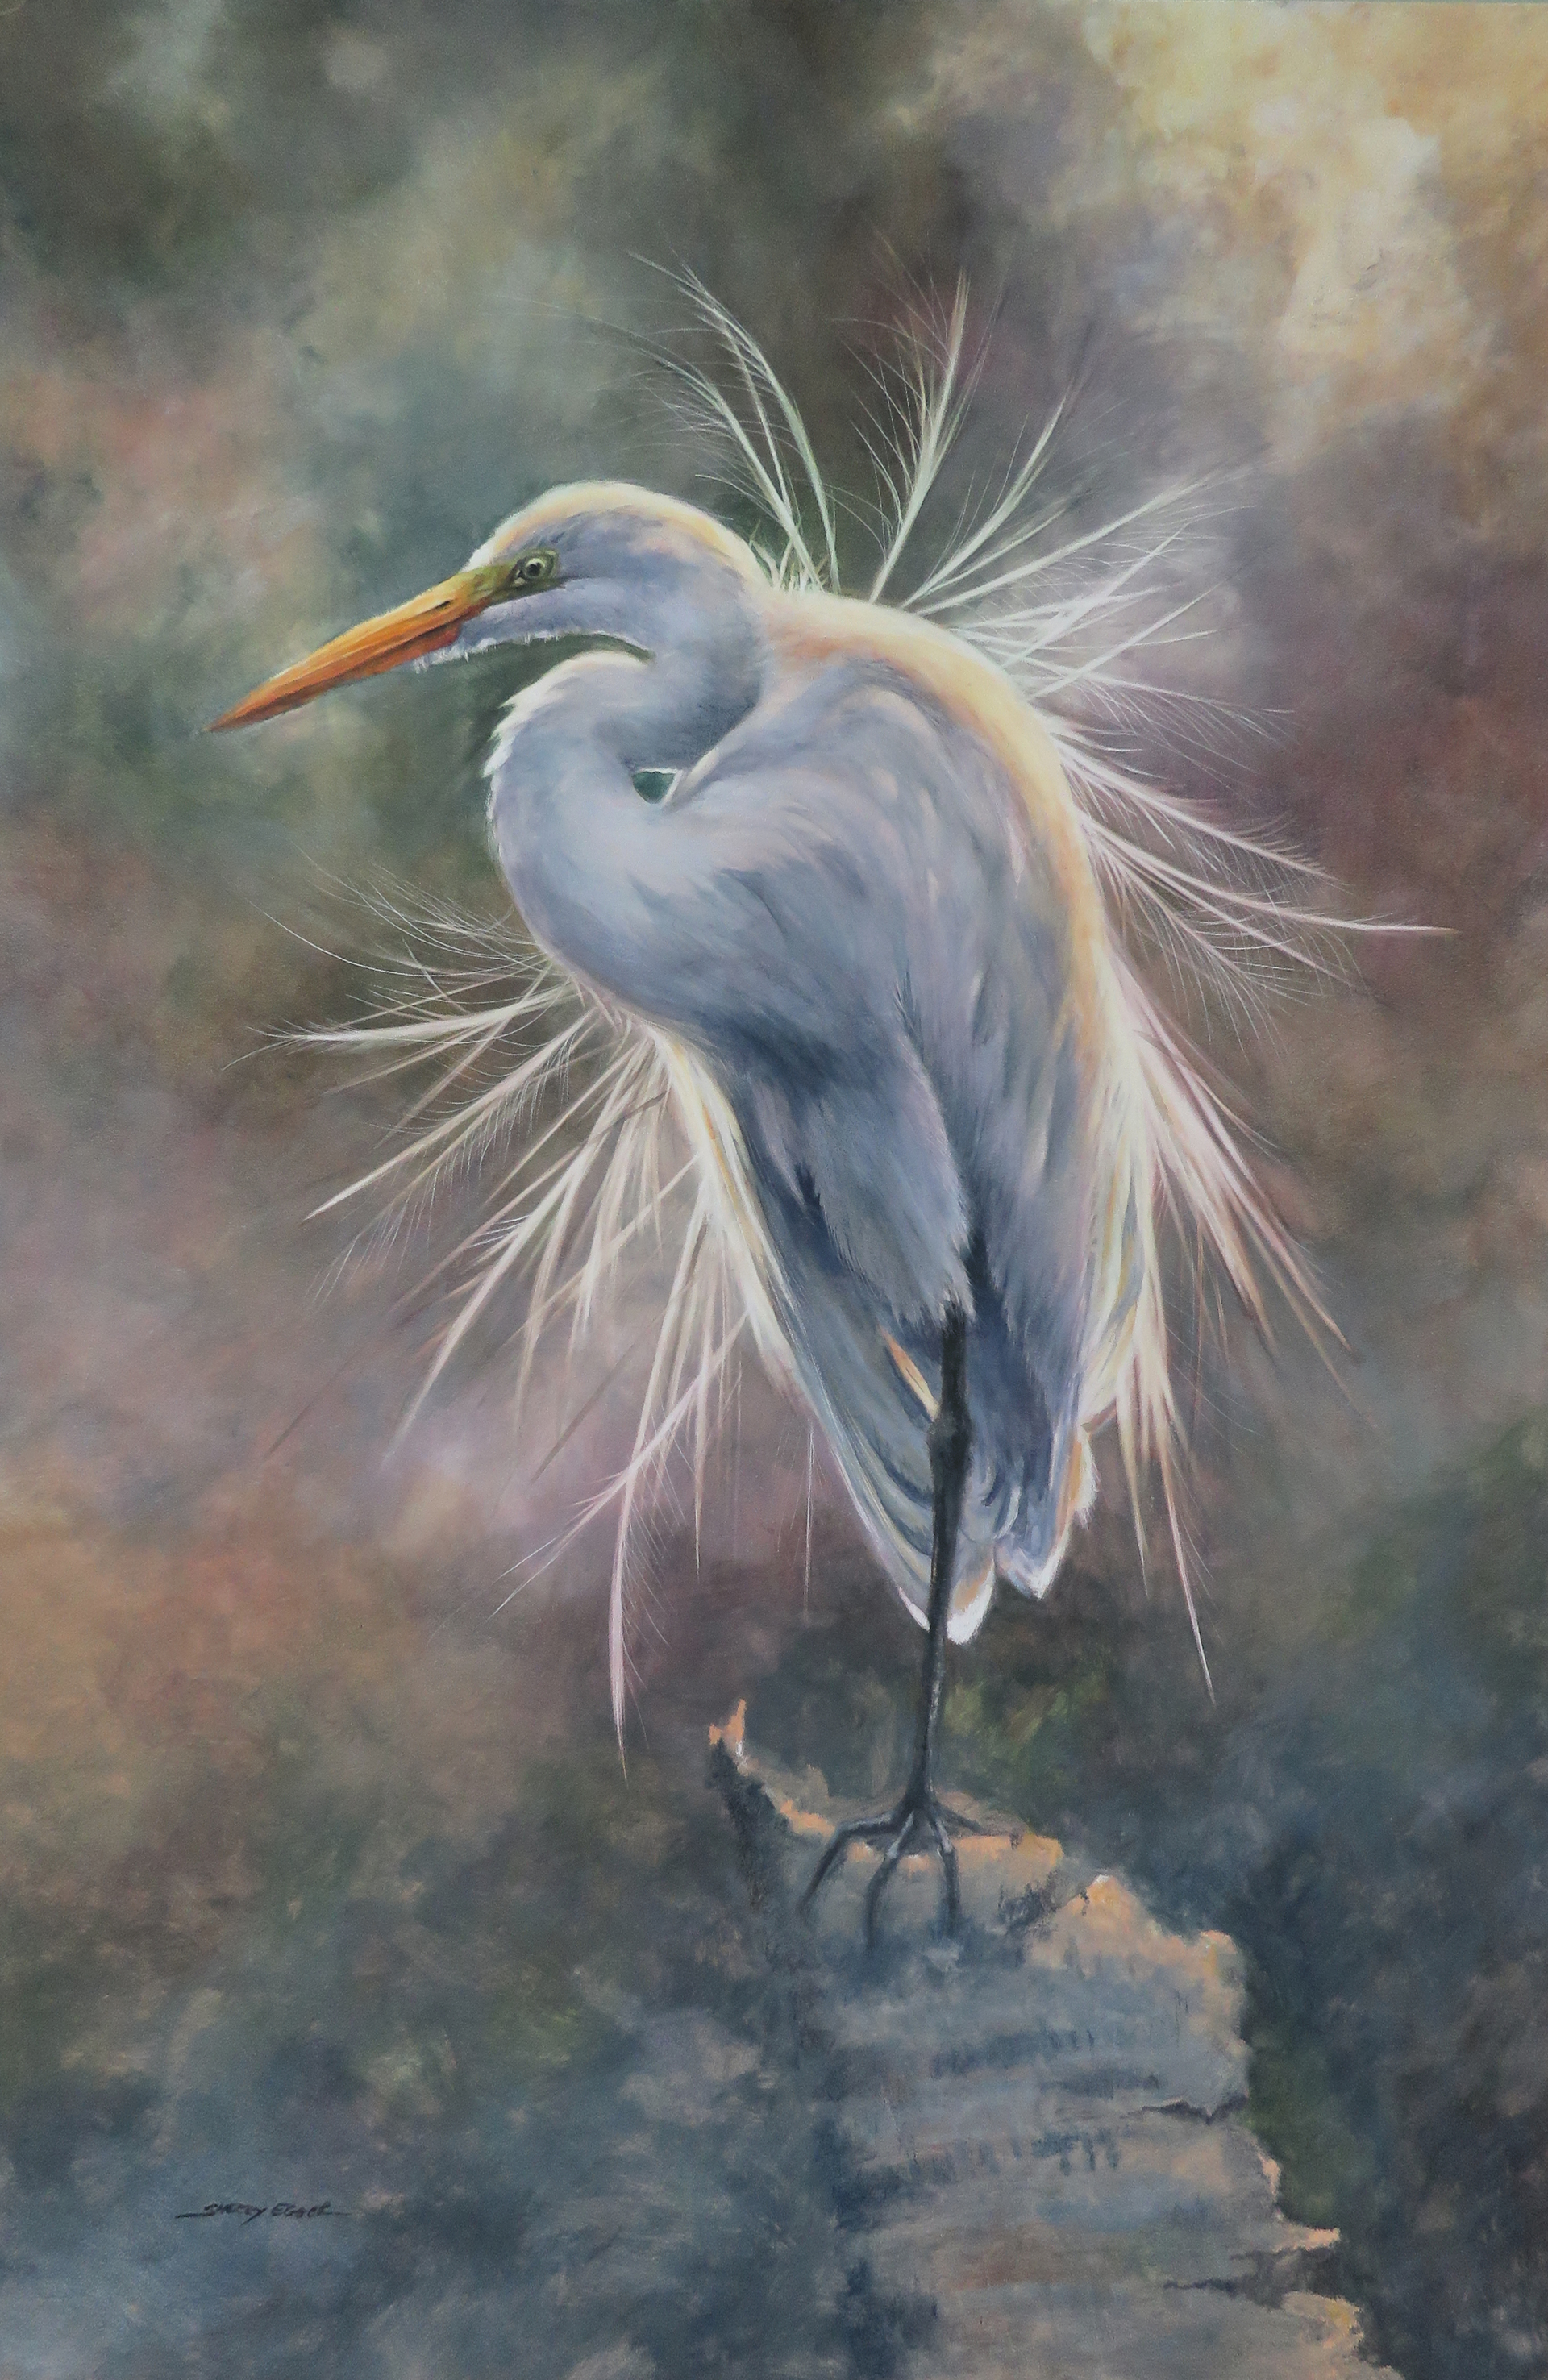 Great Egret at Daybreak by Sherry Egger